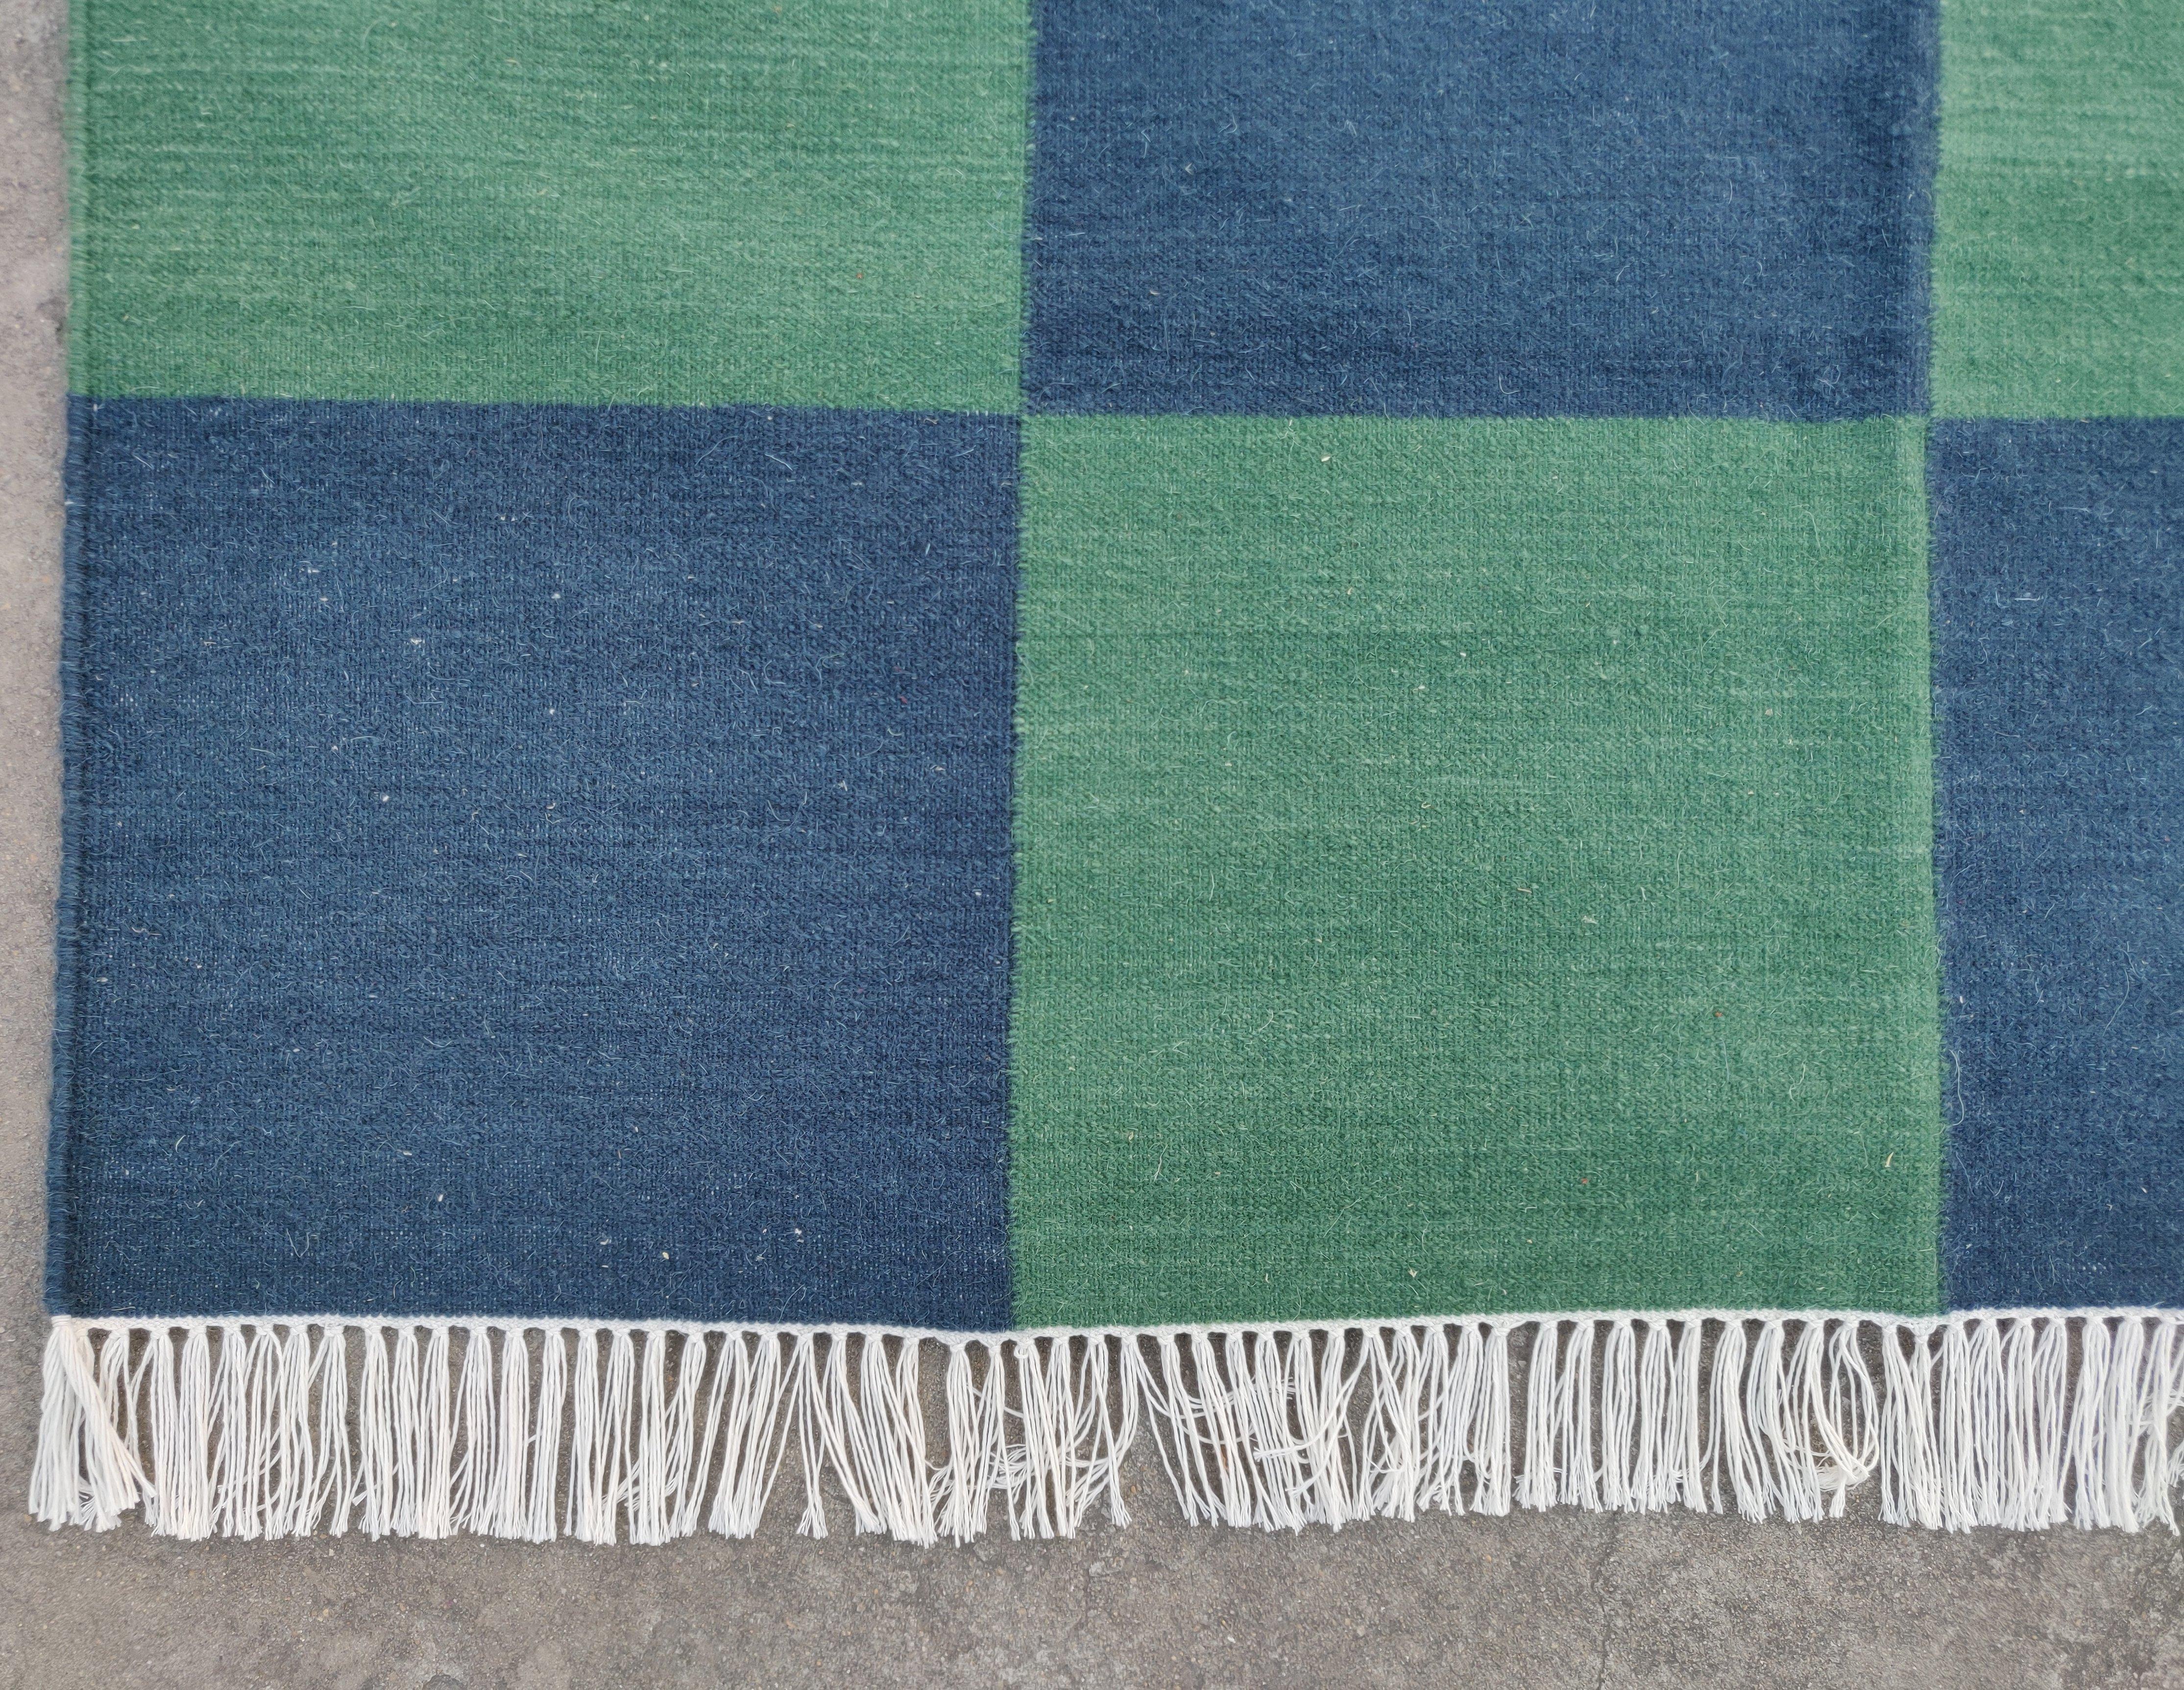 Handmade Woolen Area Flat Weave Rug, 6x9 Blue And Green Tile Checked Dhurrie Rug For Sale 3